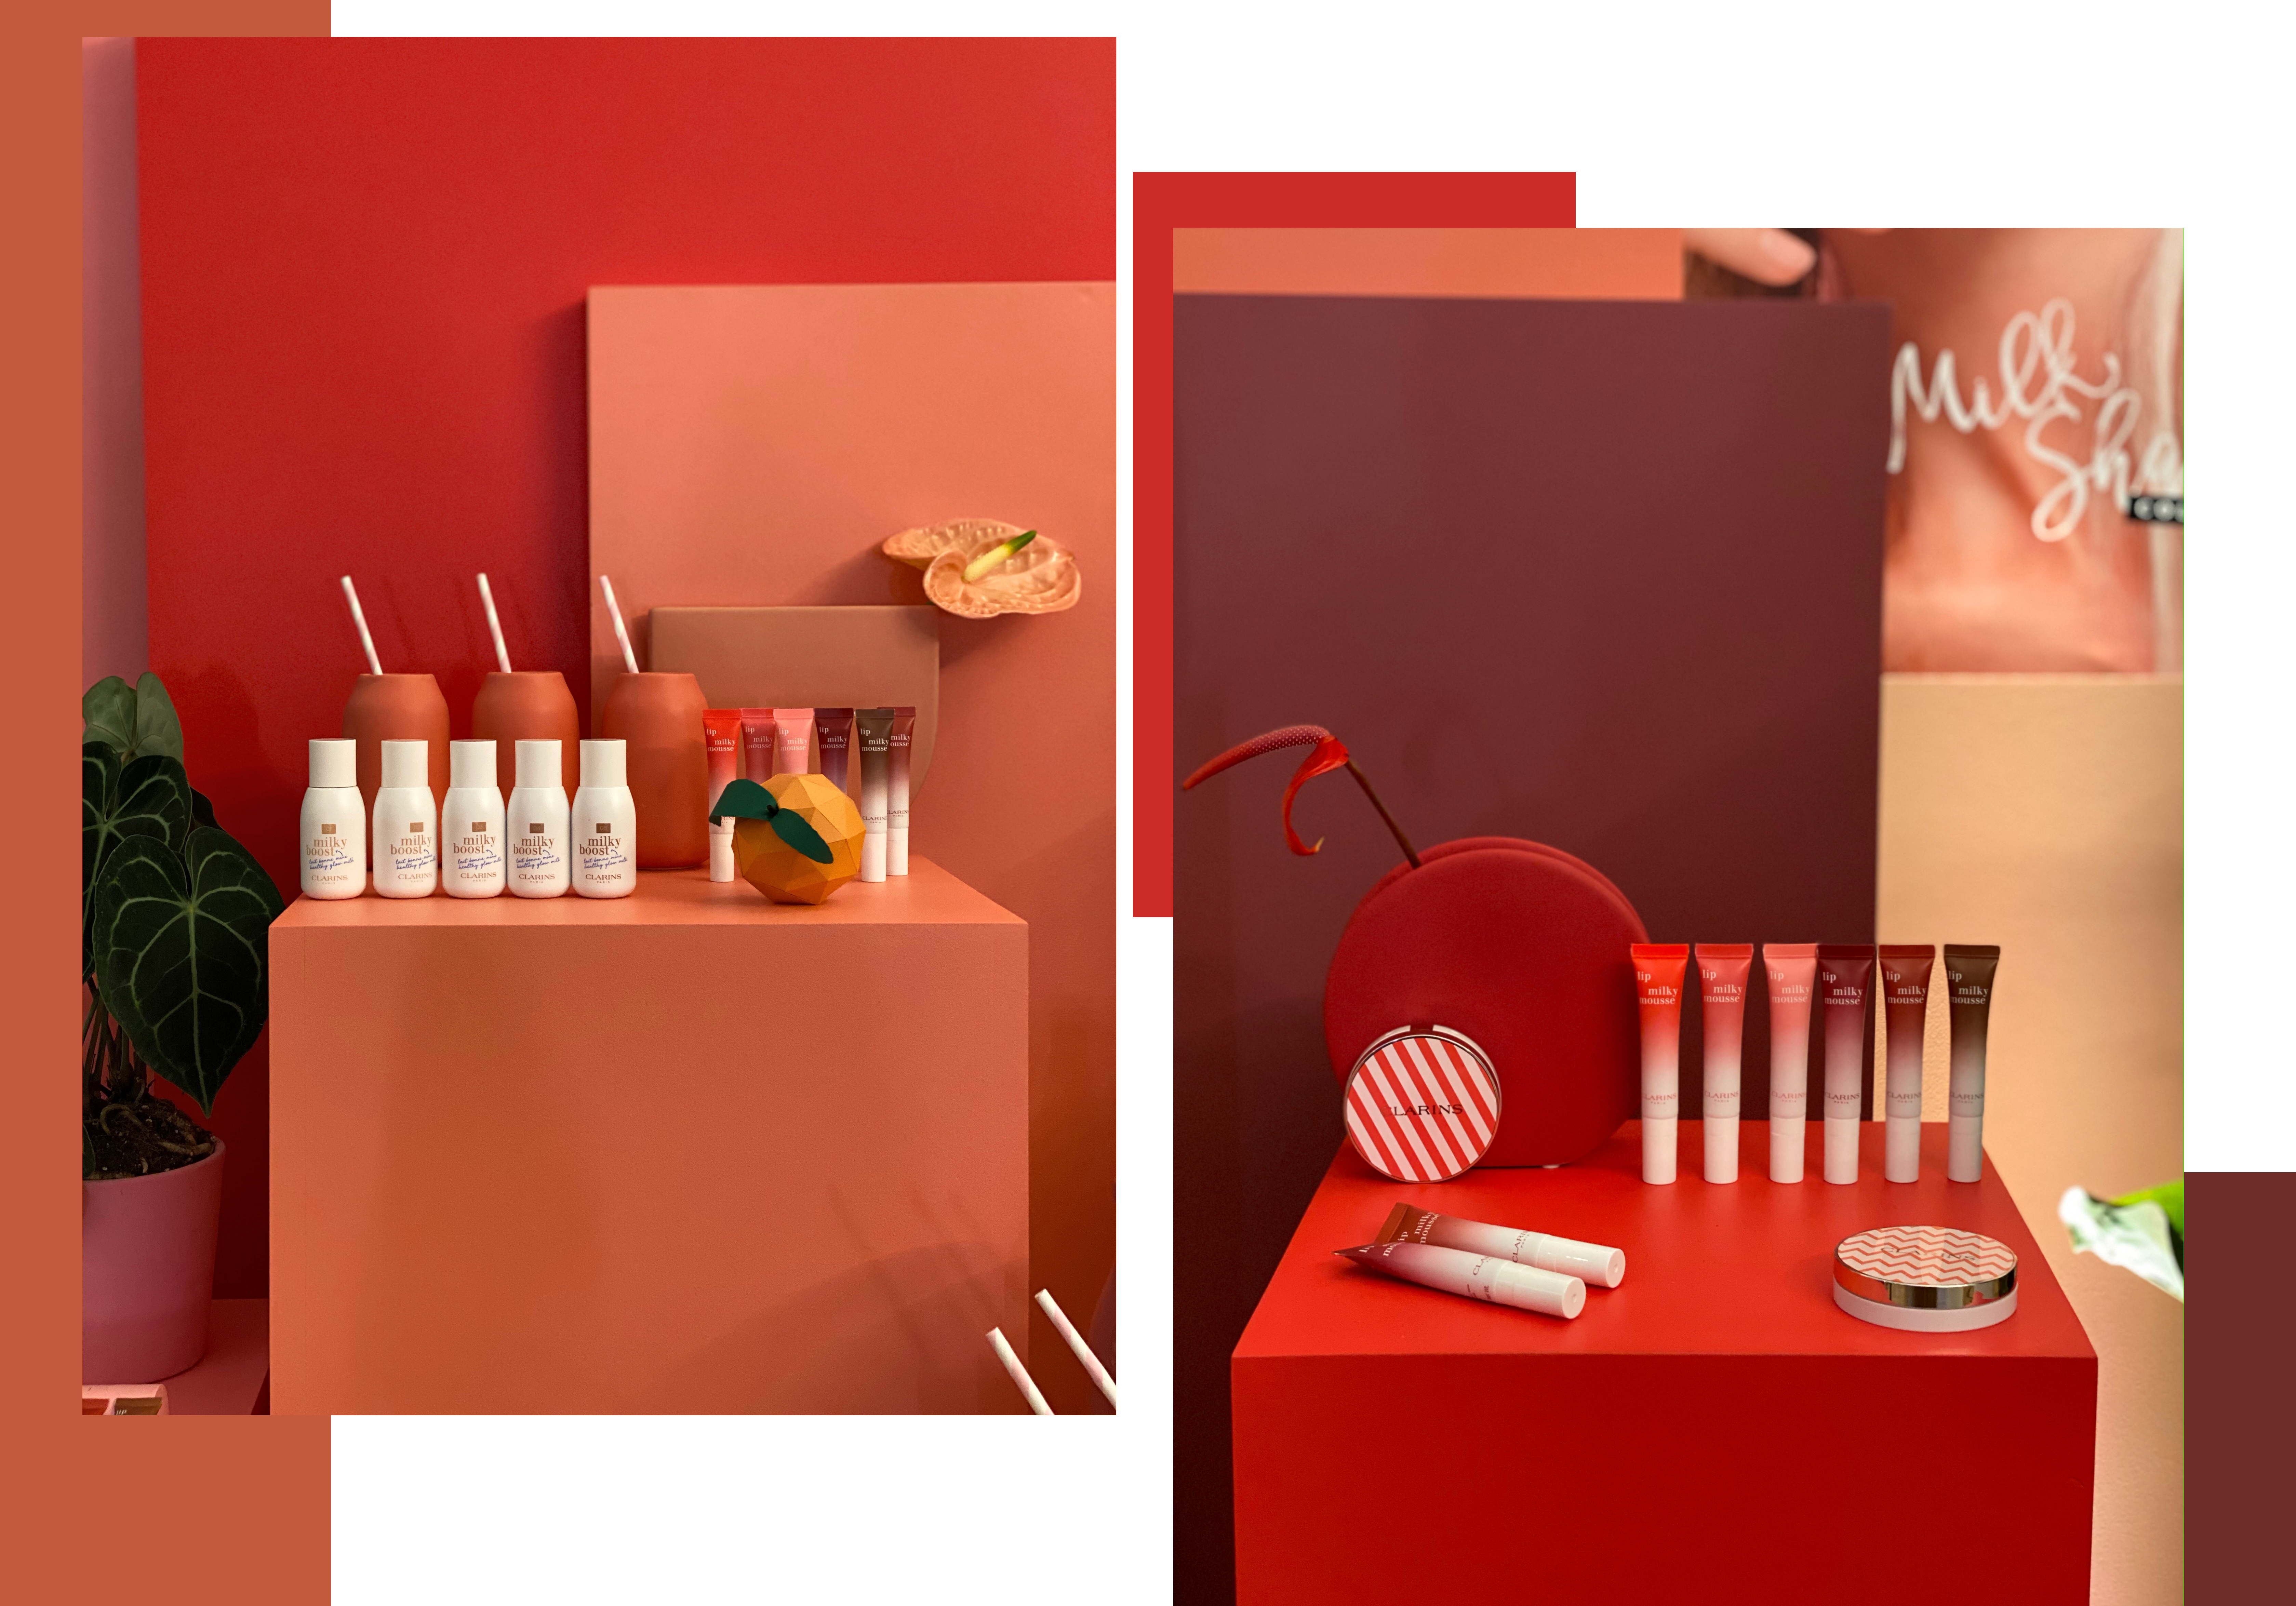 Lip Milky Mousse Clarins Milk Shake Collection